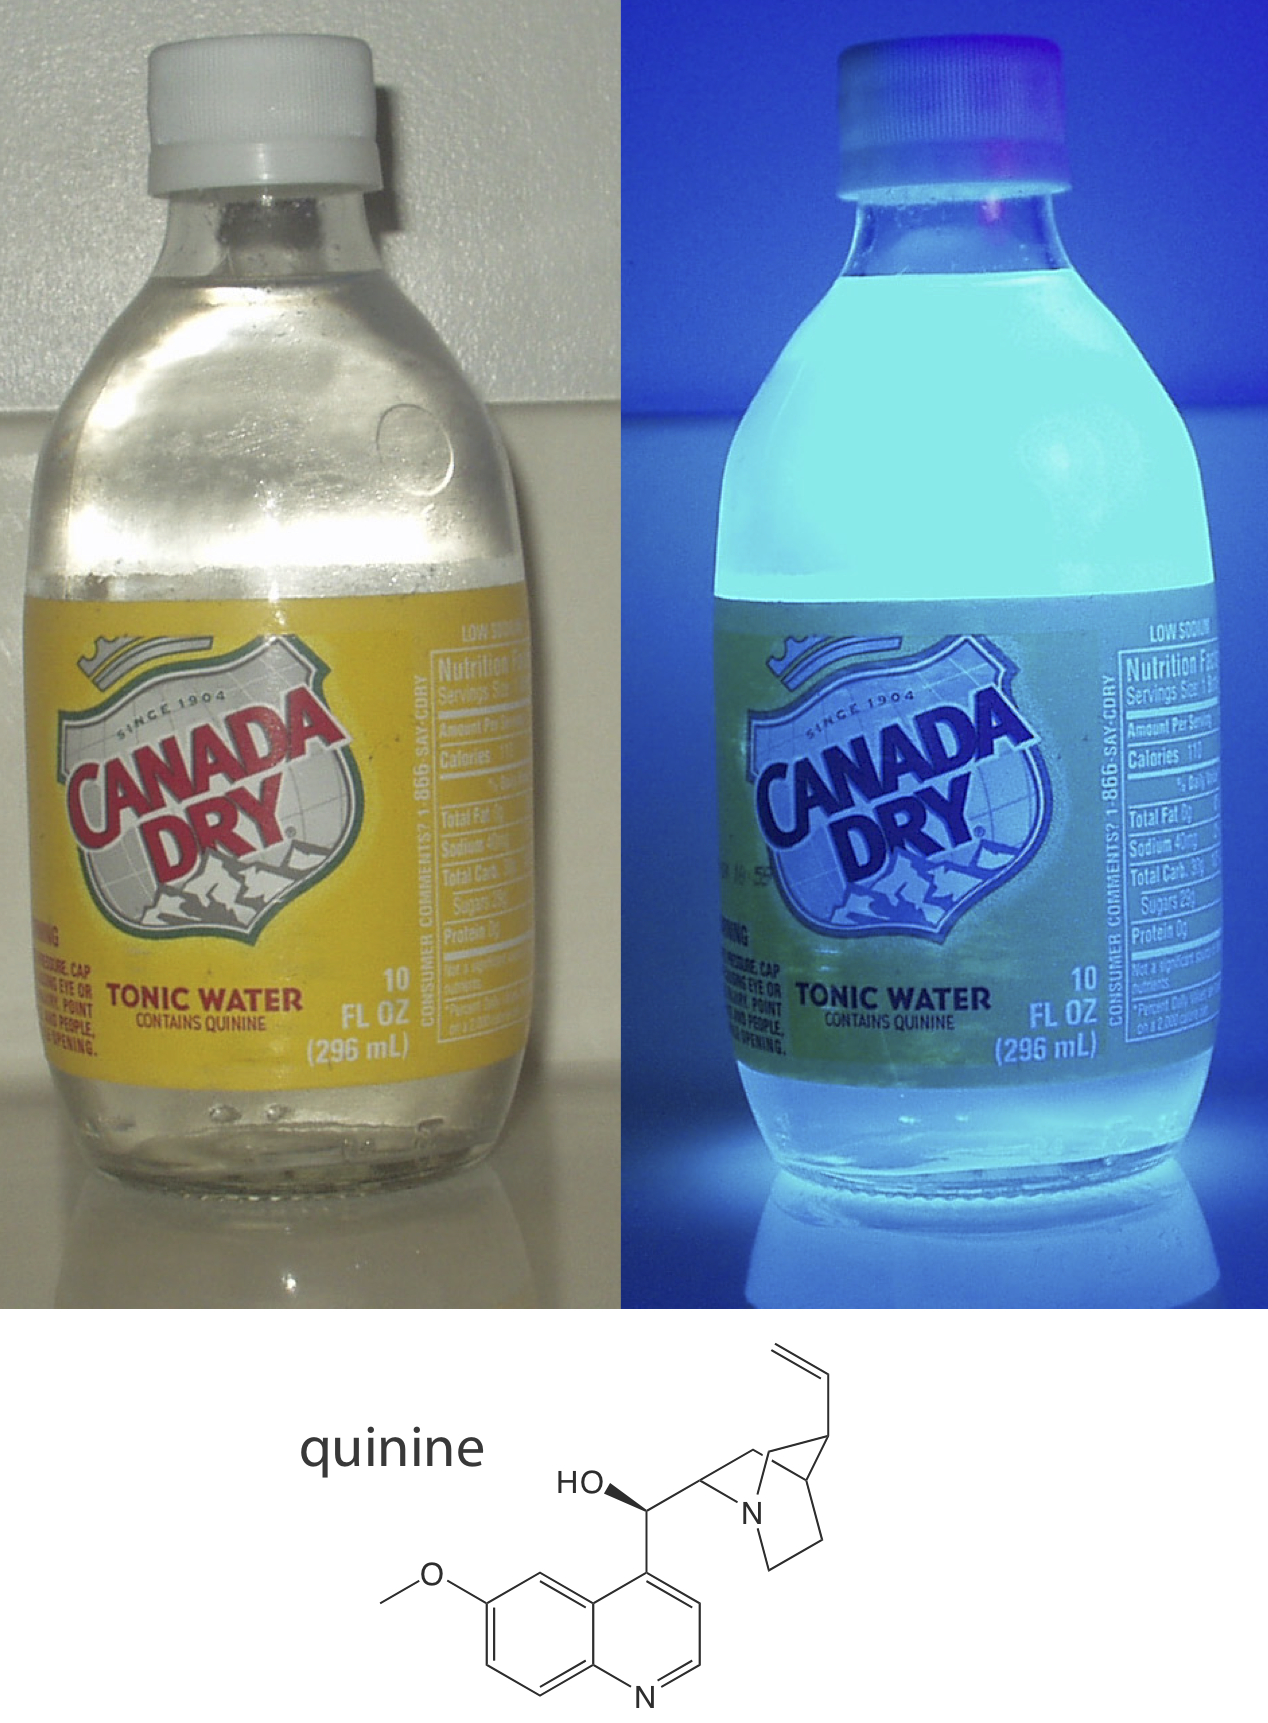 The bottle of tonic water is shown under normal light and under a black light. Under normal light, the bottle is clear and colorless, but under the black light, the bottle glows a blue color.